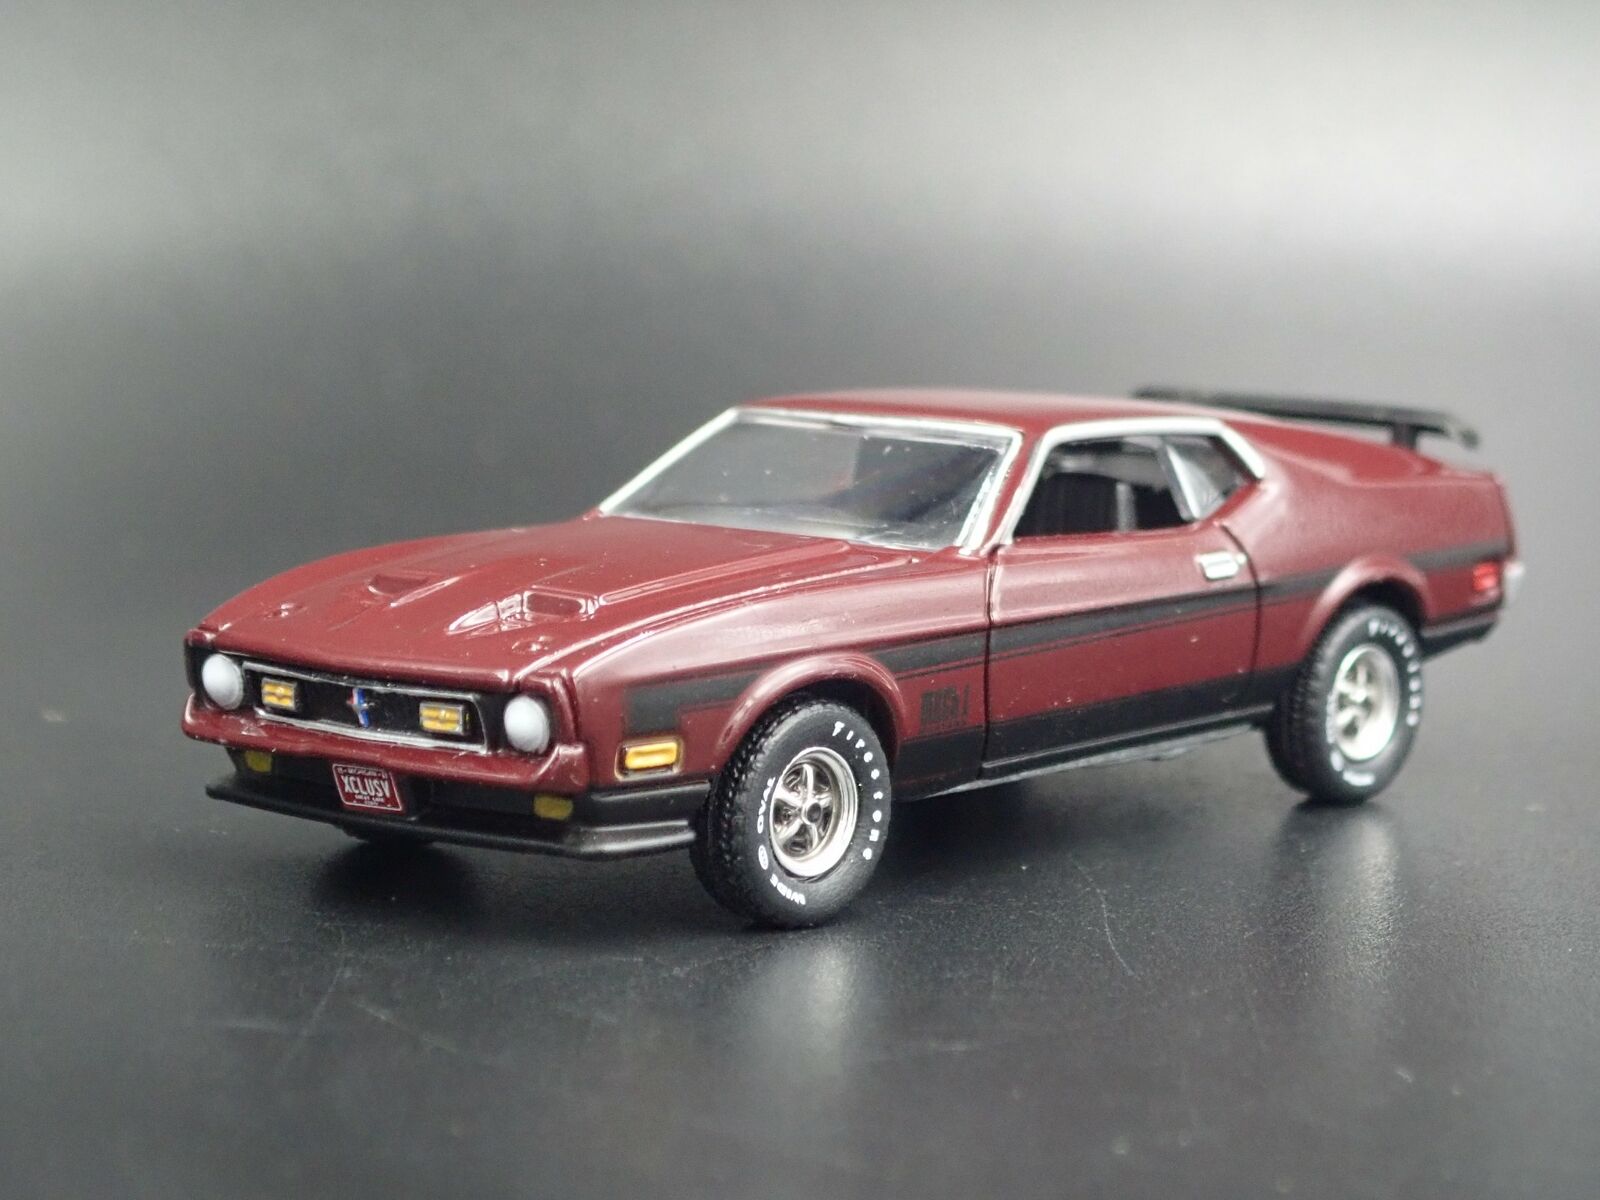 1972 72 FORD MUSTANG MACH 1 FASTBACK 1/64 SCALE COLLECTIBLE DIECAST MODEL CAR